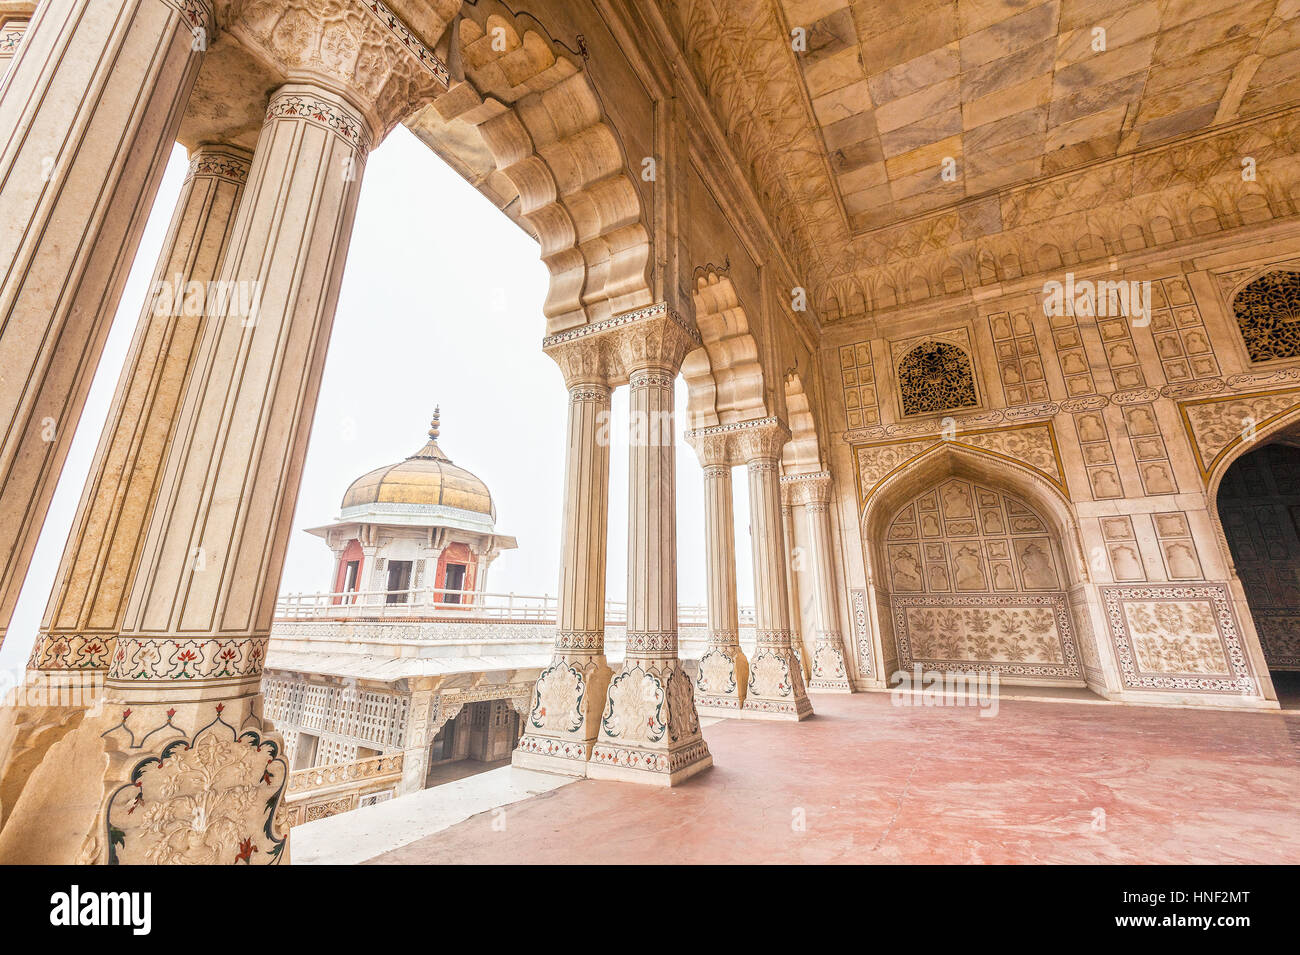 Highly decorated marble interior of Diwan-e-Khas, 'The Hall of Private Audiences' at Agra Fort. The octagonal tower of Musamman Burj can be seen throu Stock Photo